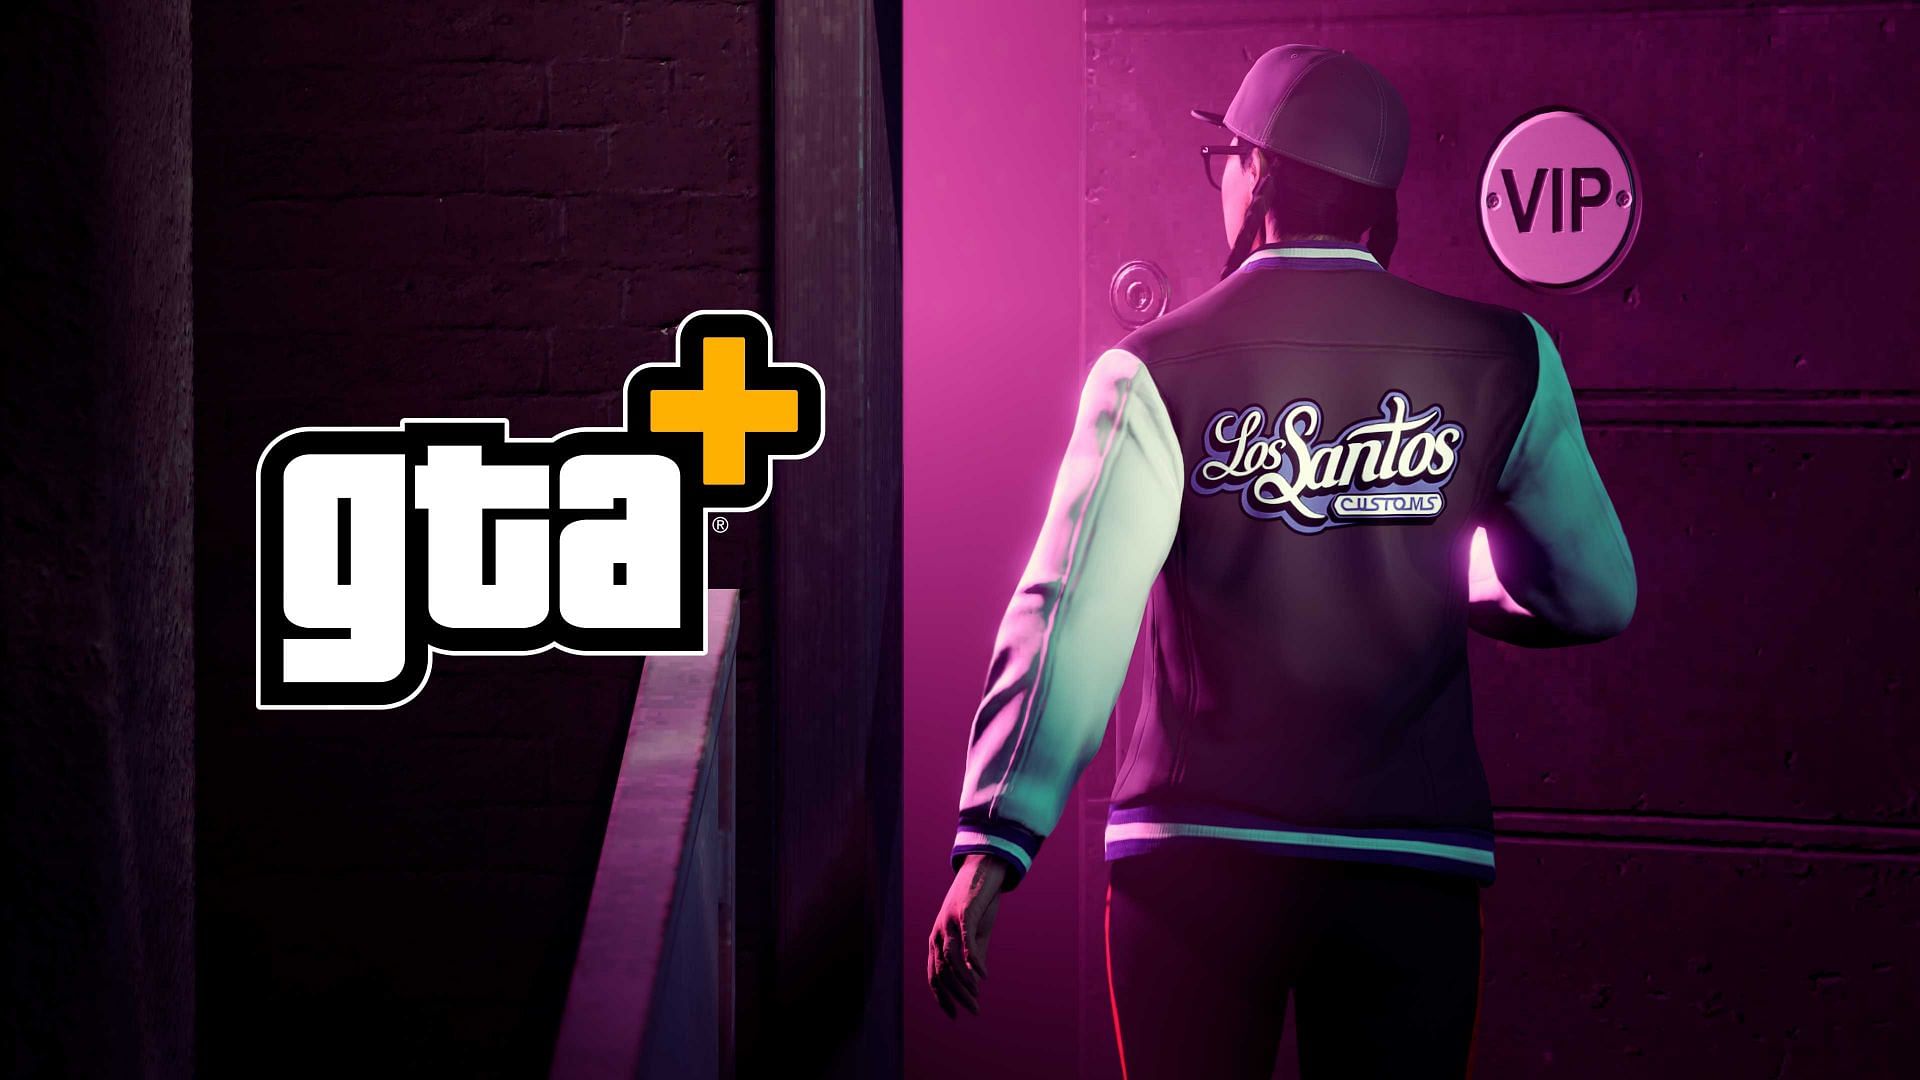 A brief about GTA+ and its bonuses for the members in GTA Online (Image via Rockstar Games)